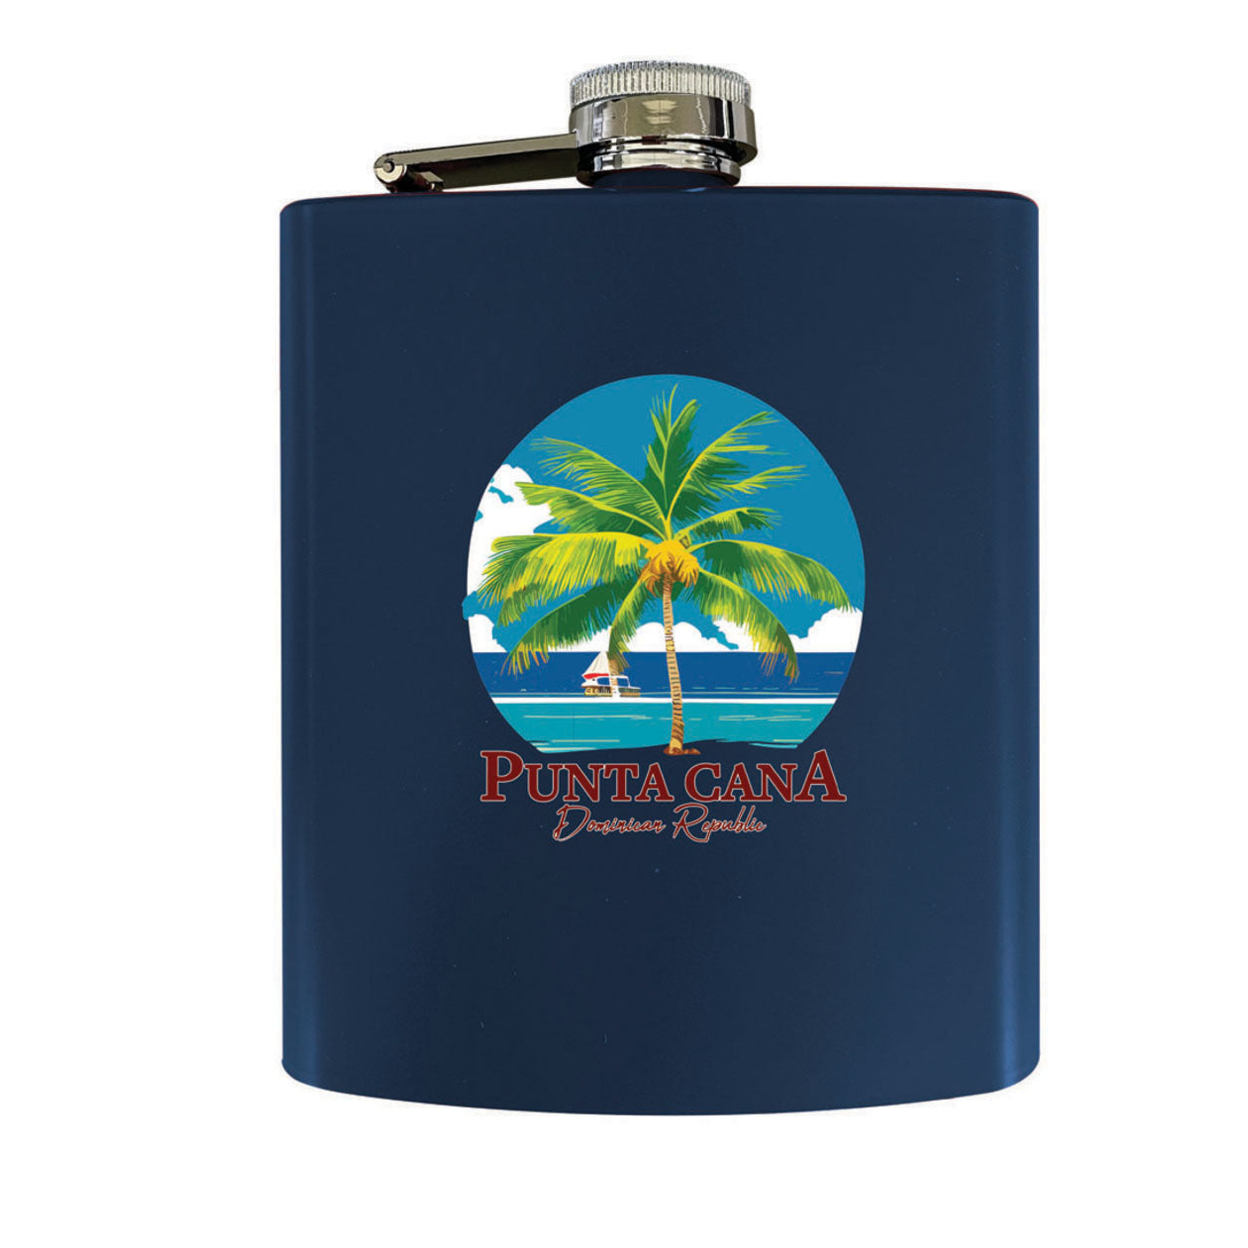 Punta Cana Dominican Republic Souvenir Matte Finish Stainless Steel 7 Oz Flask - Red, PARROT B